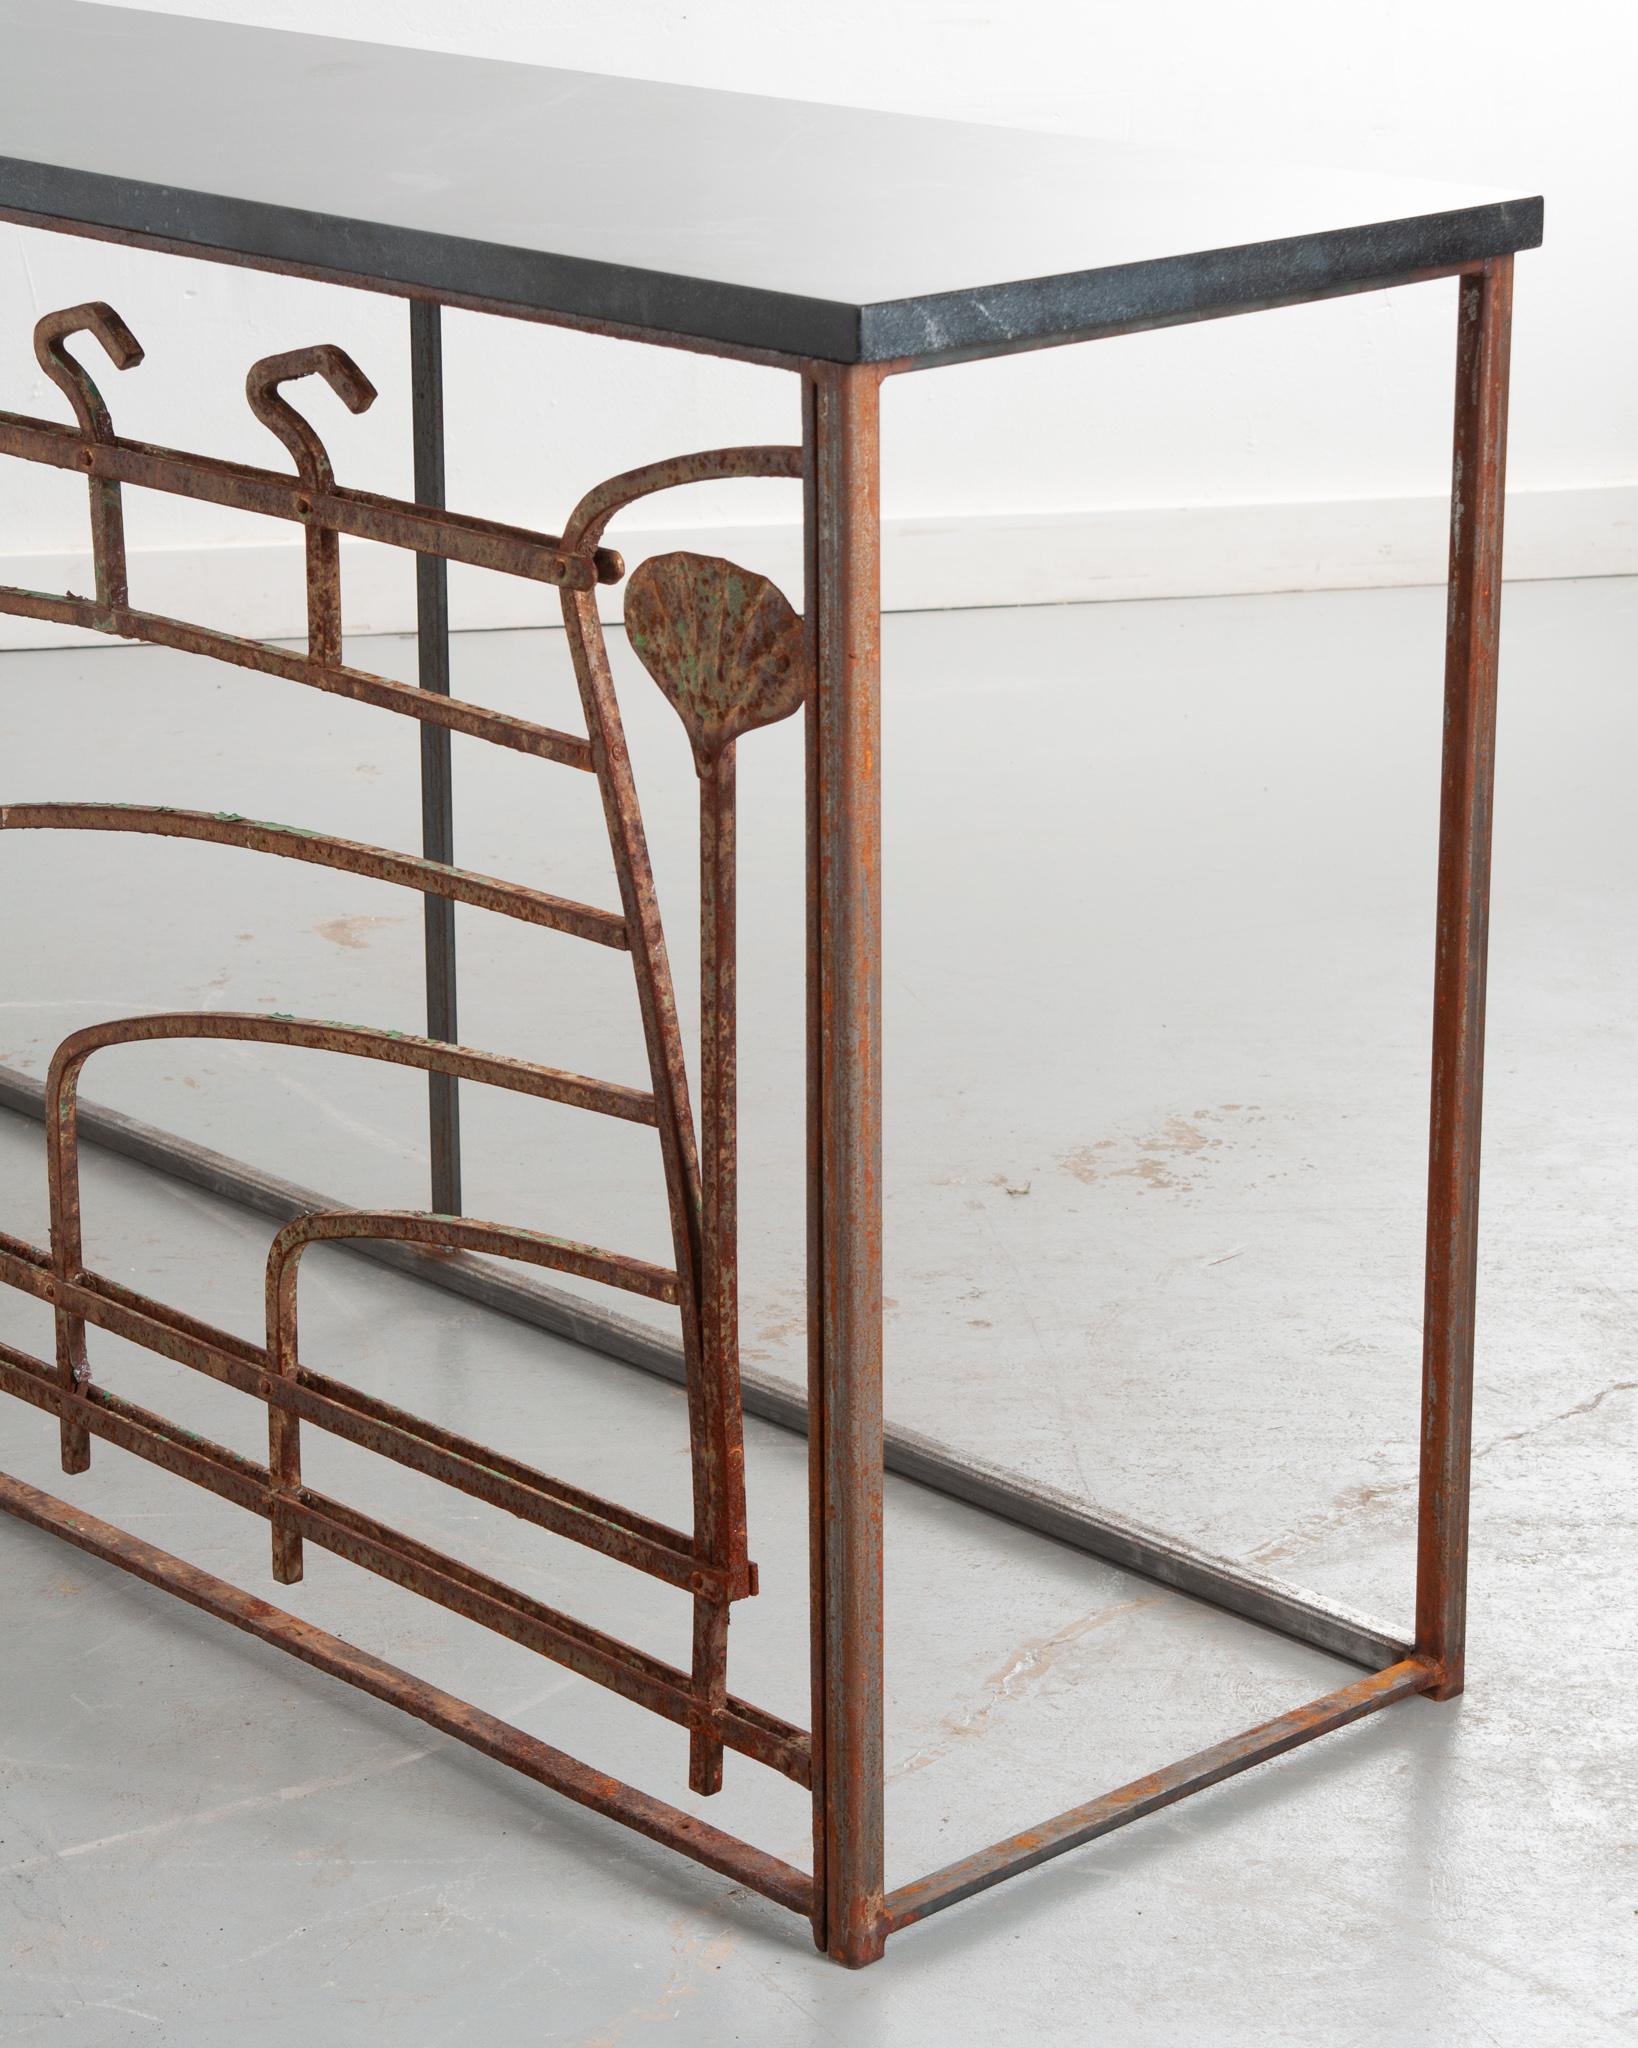 Grand French Art Nouveau Iron & Stone Console For Sale 9